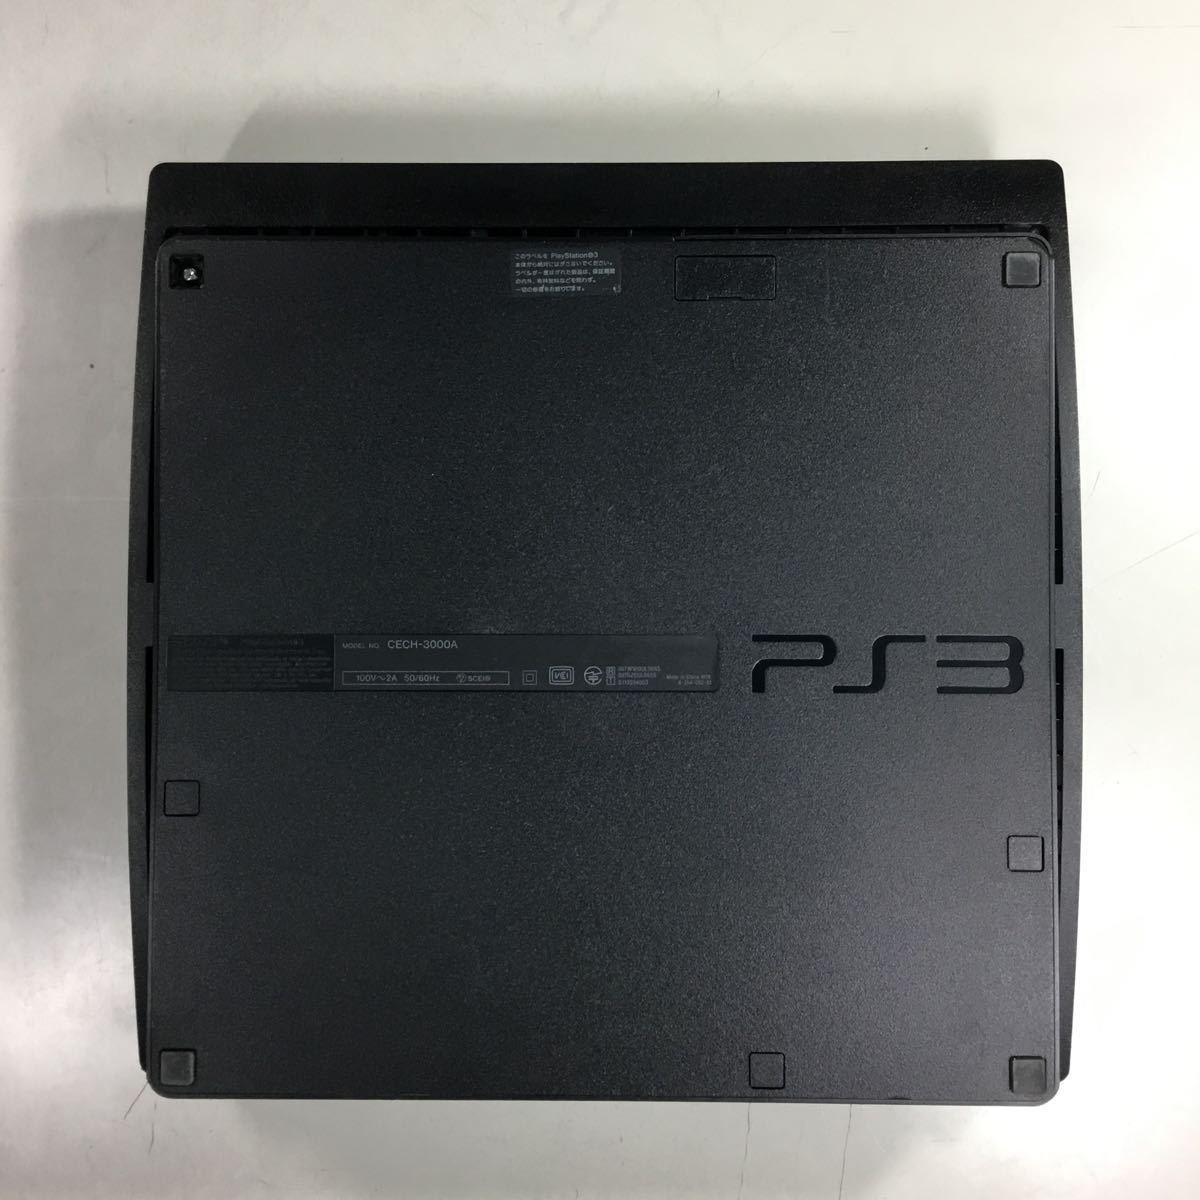 032332) SONY CECH-3000A PlayStation3 PS3 プレイステーション3